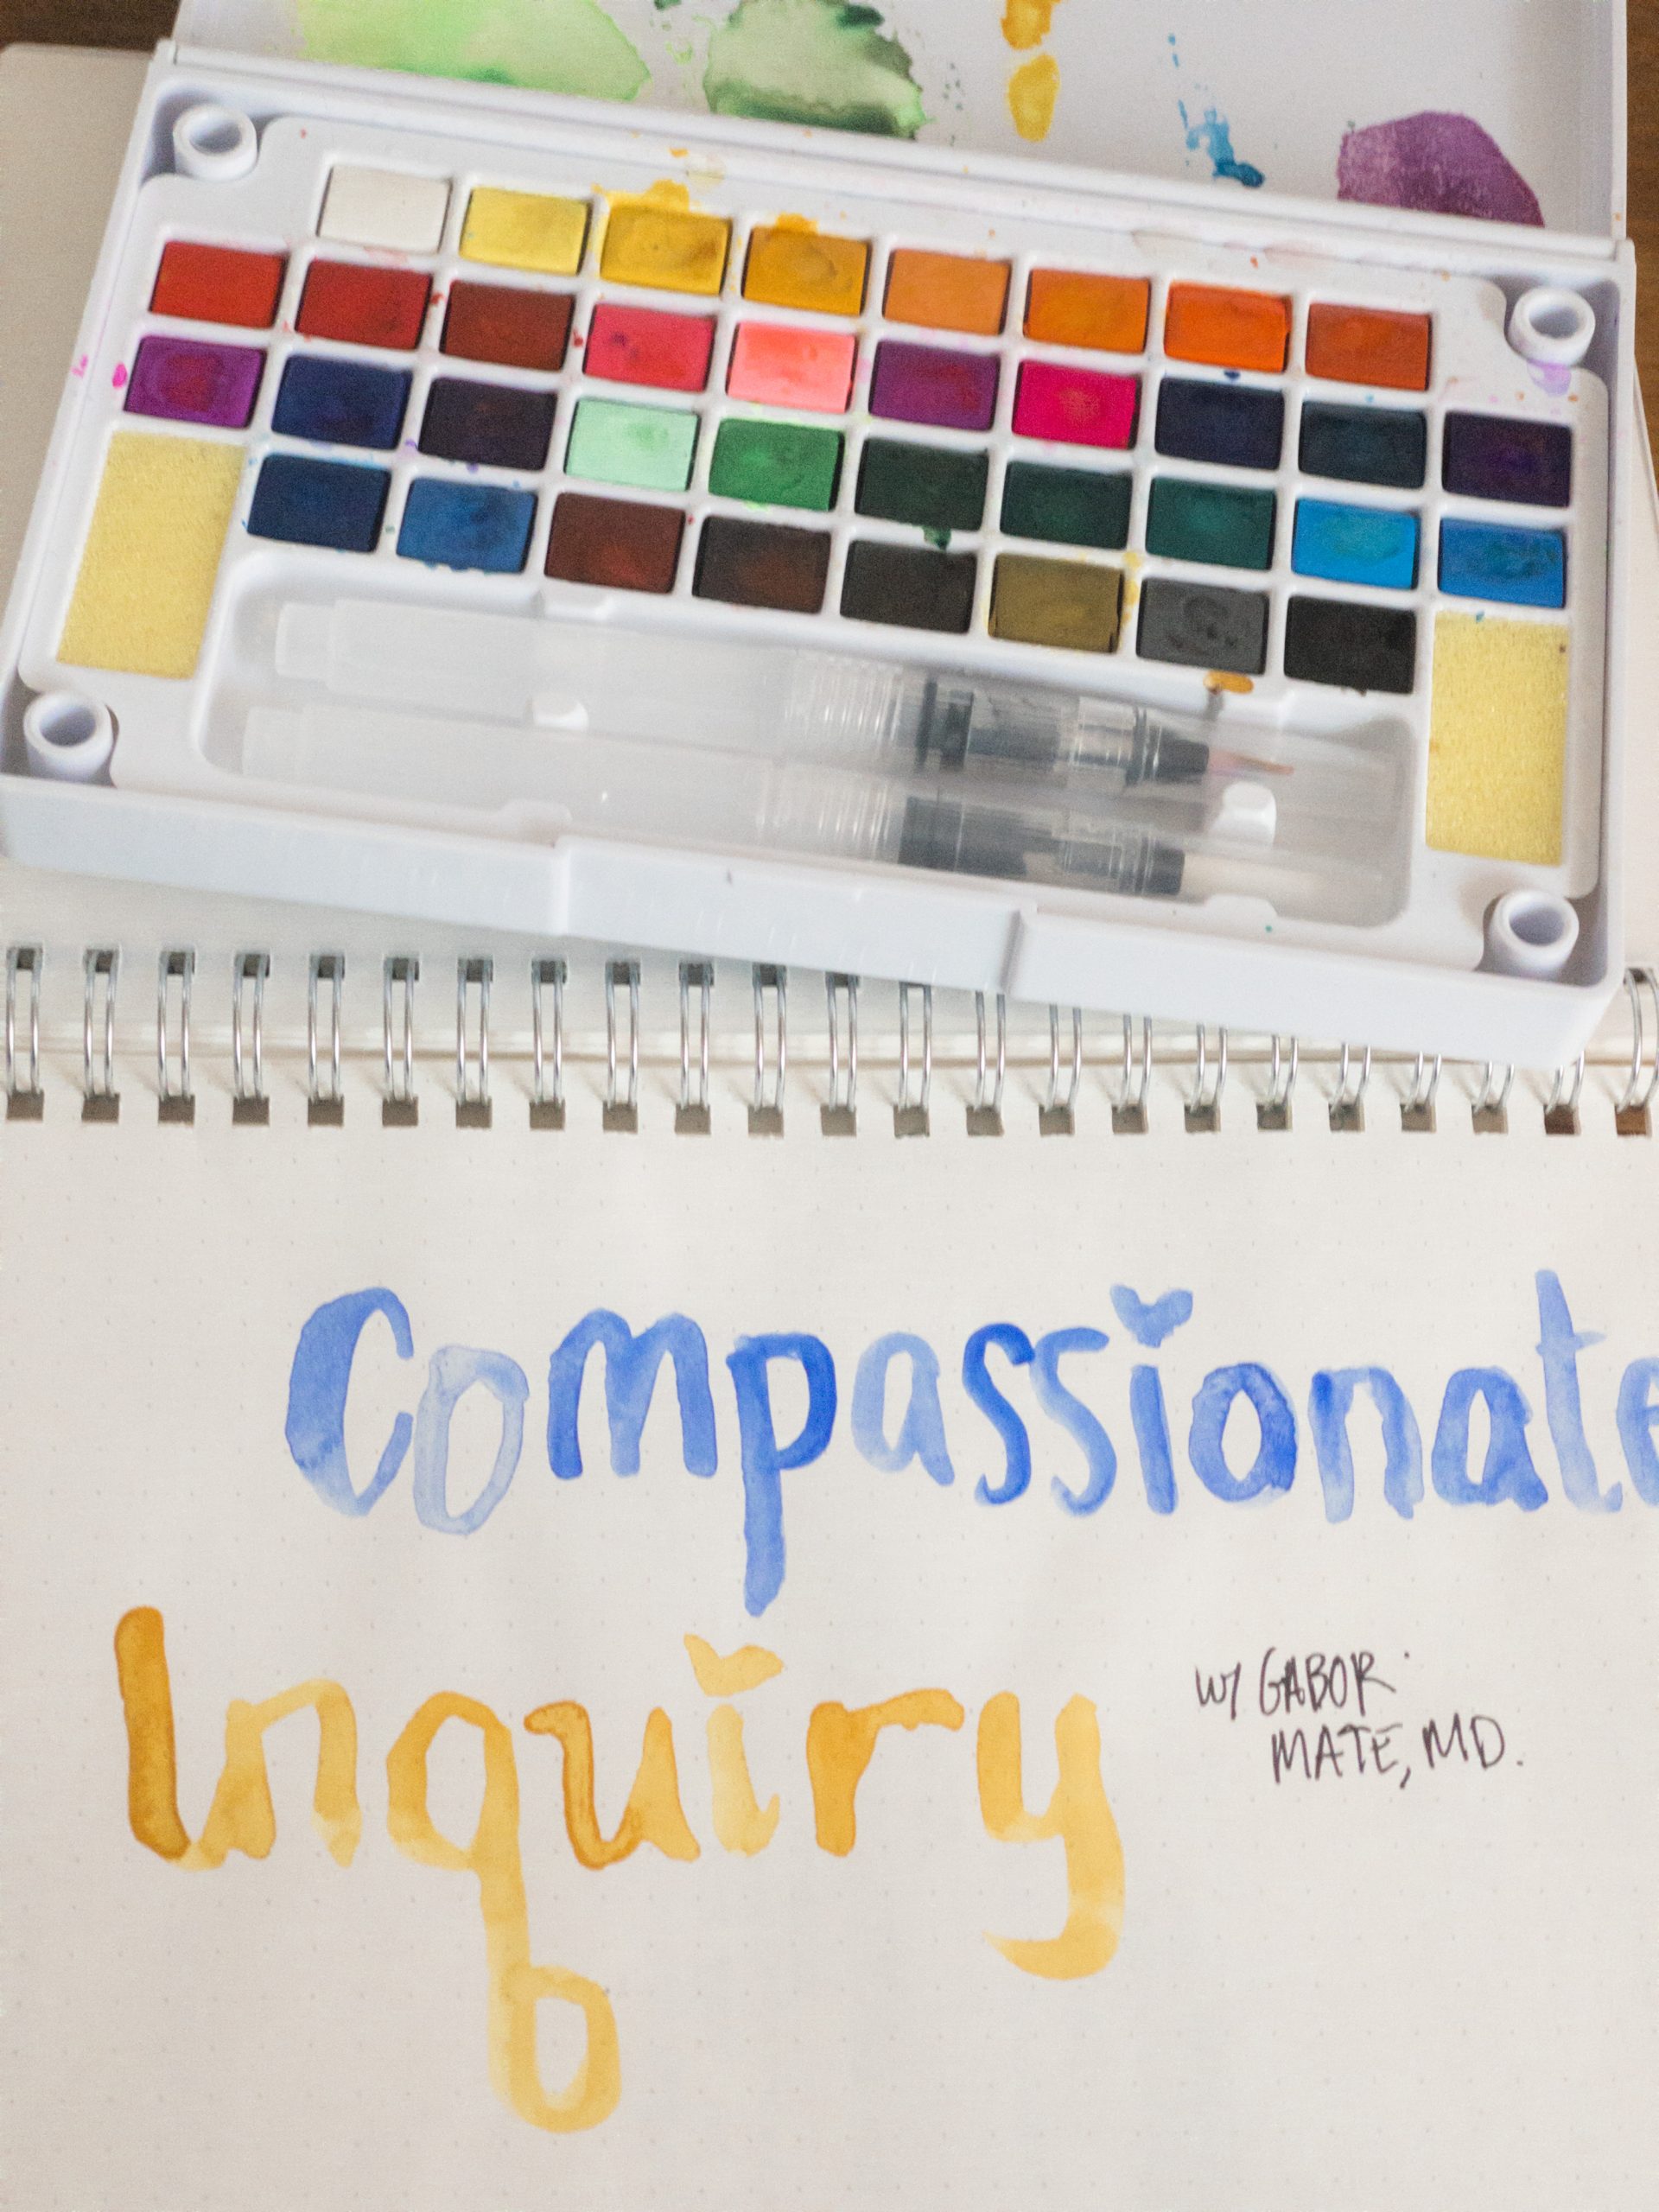 Journal with the words Compassionate Inquiry painted on it in Blue and Yellow 